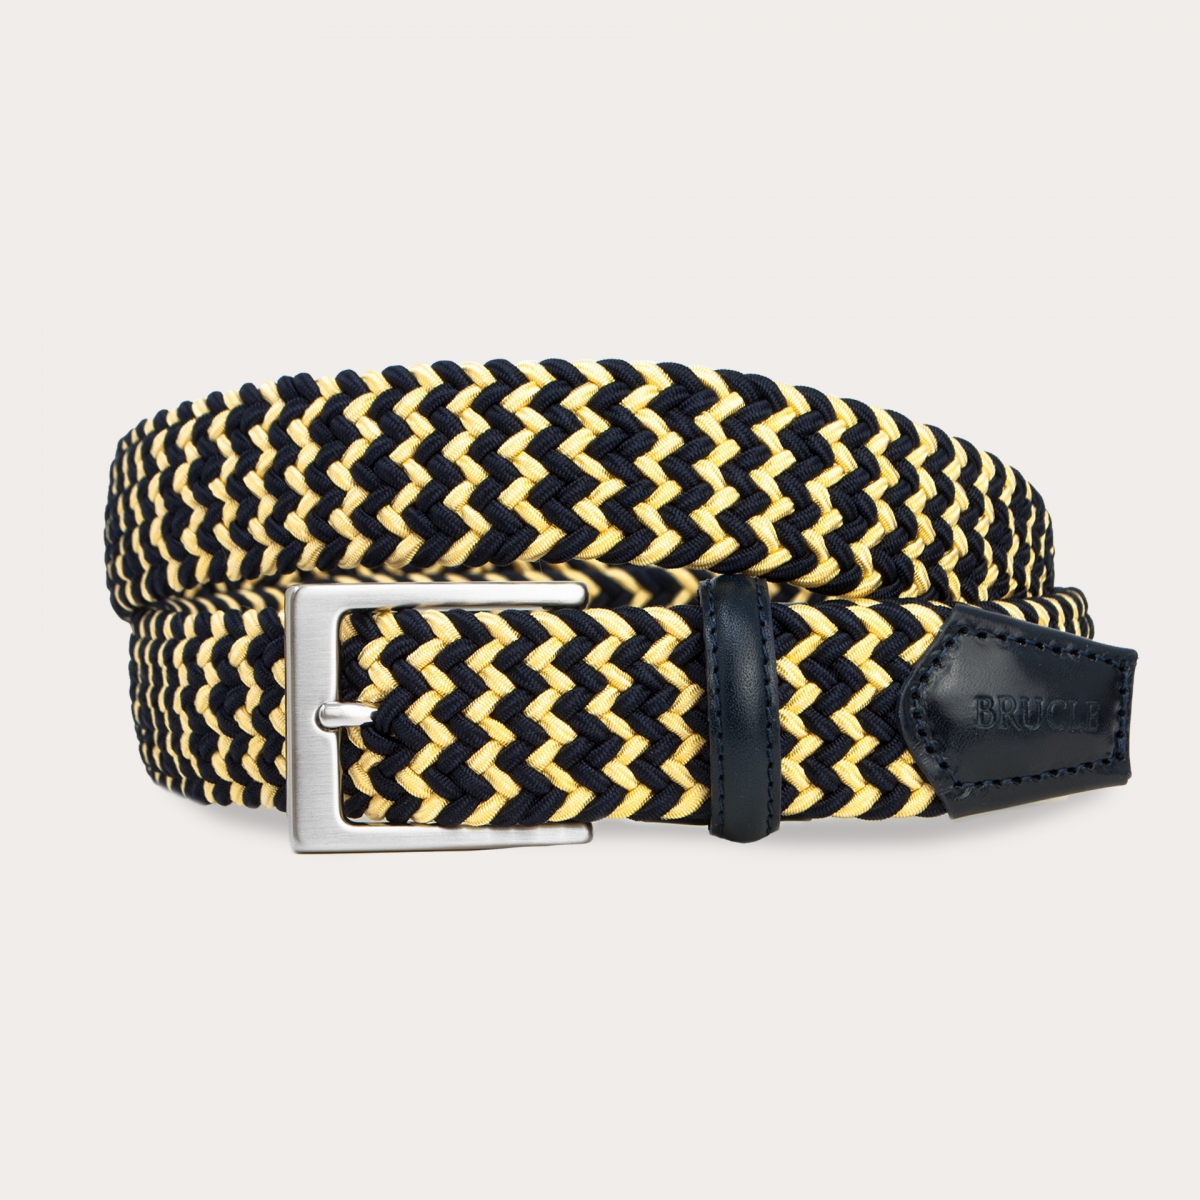 BRUCLE Braided elastic blue and yellow belt